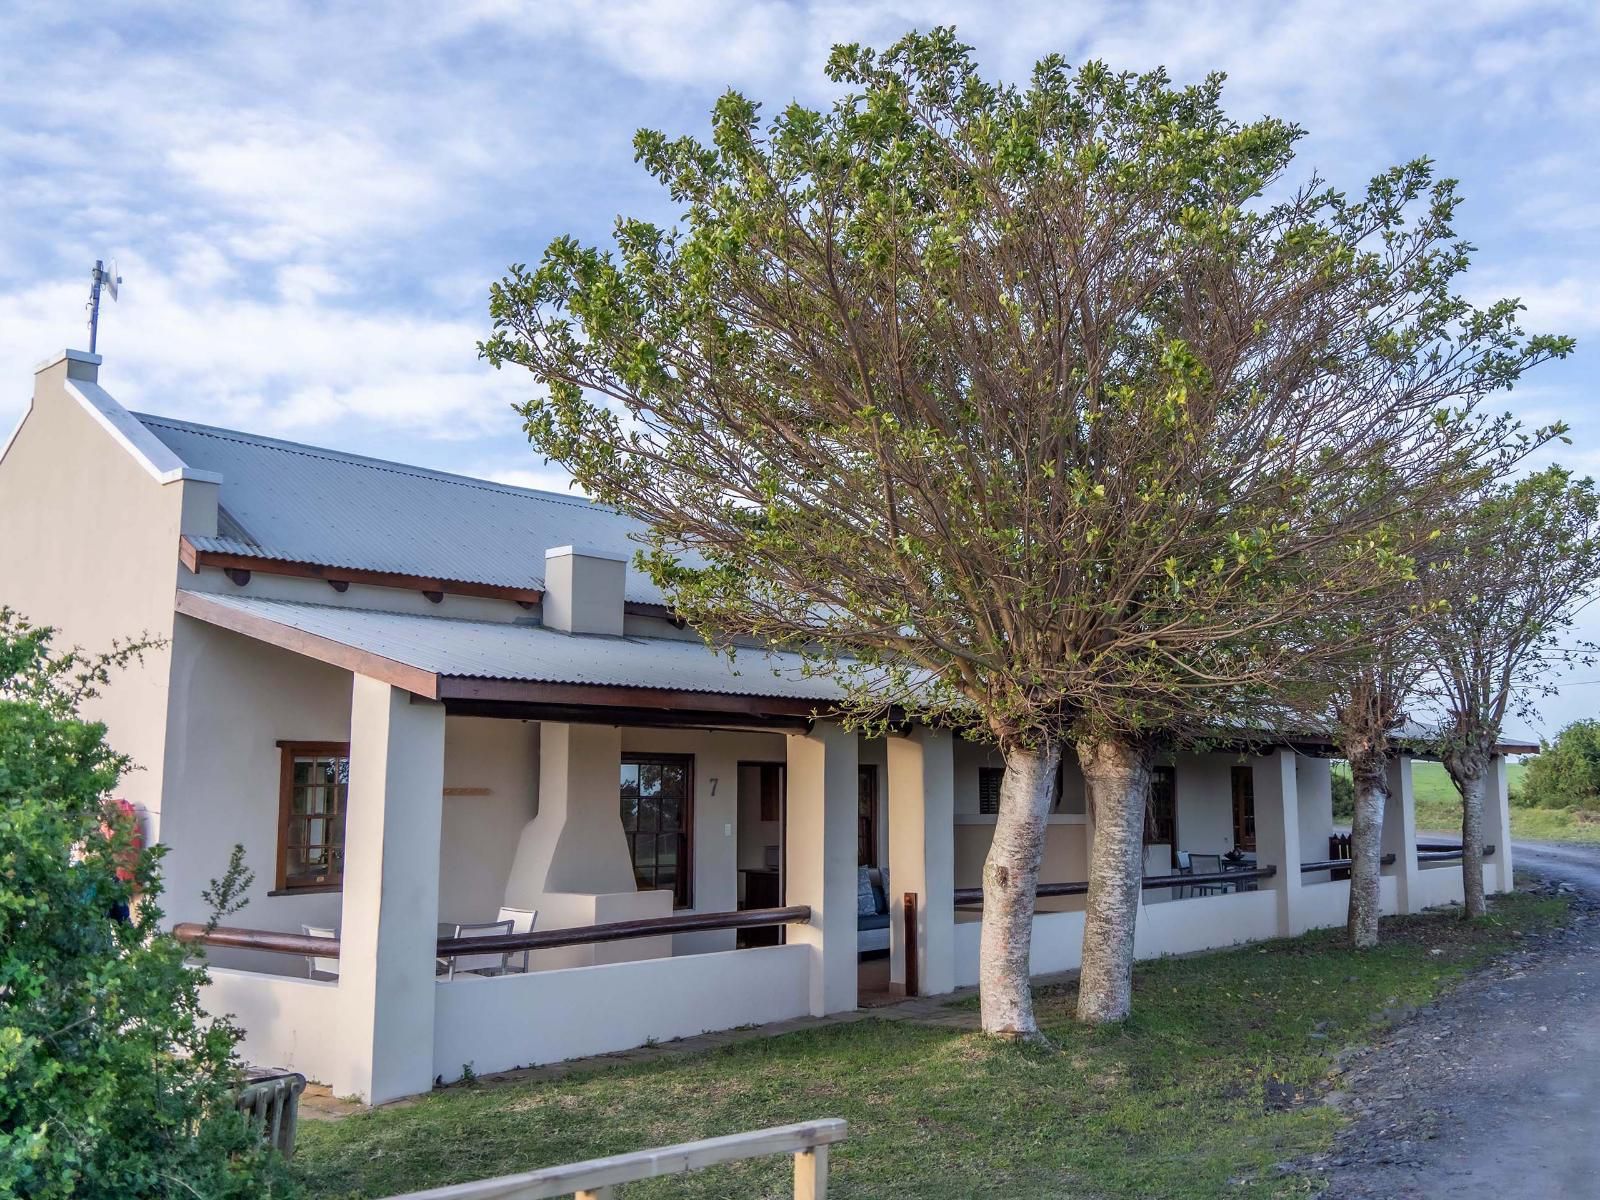 Oyster Bay Lodge Oyster Bay Eastern Cape South Africa House, Building, Architecture